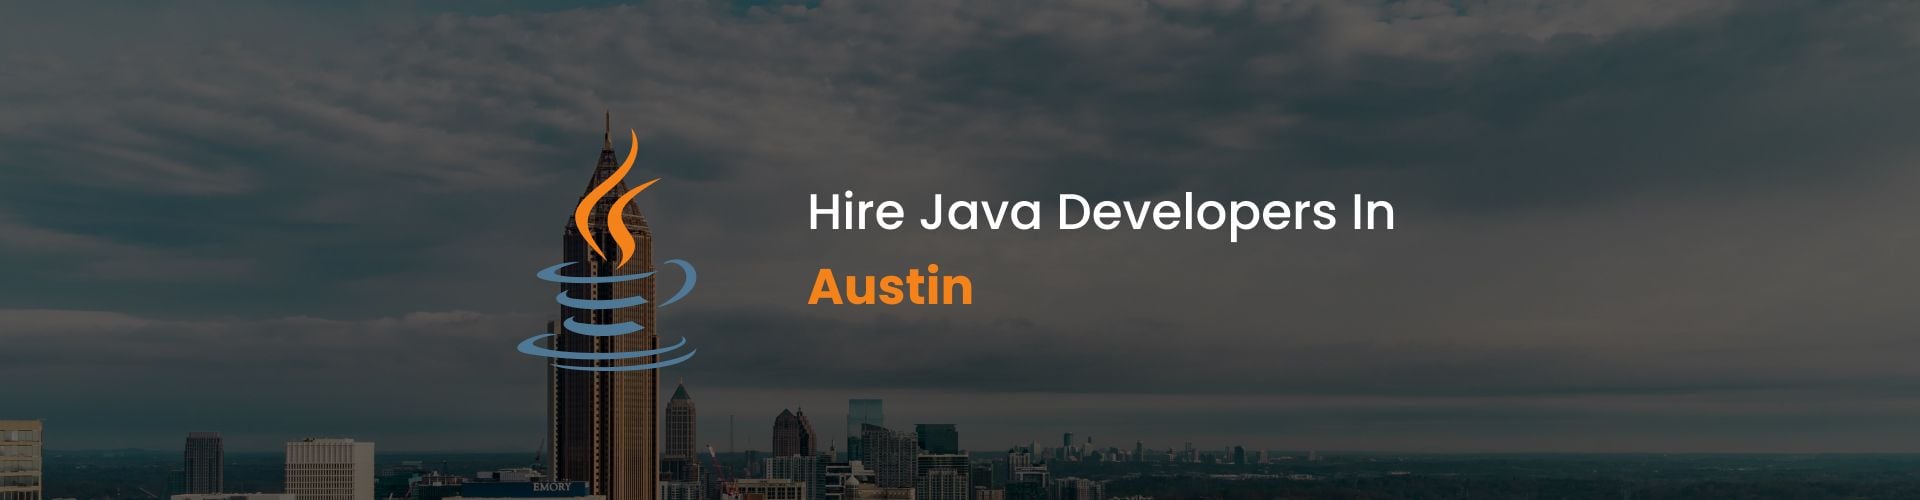 hire java developers in austin